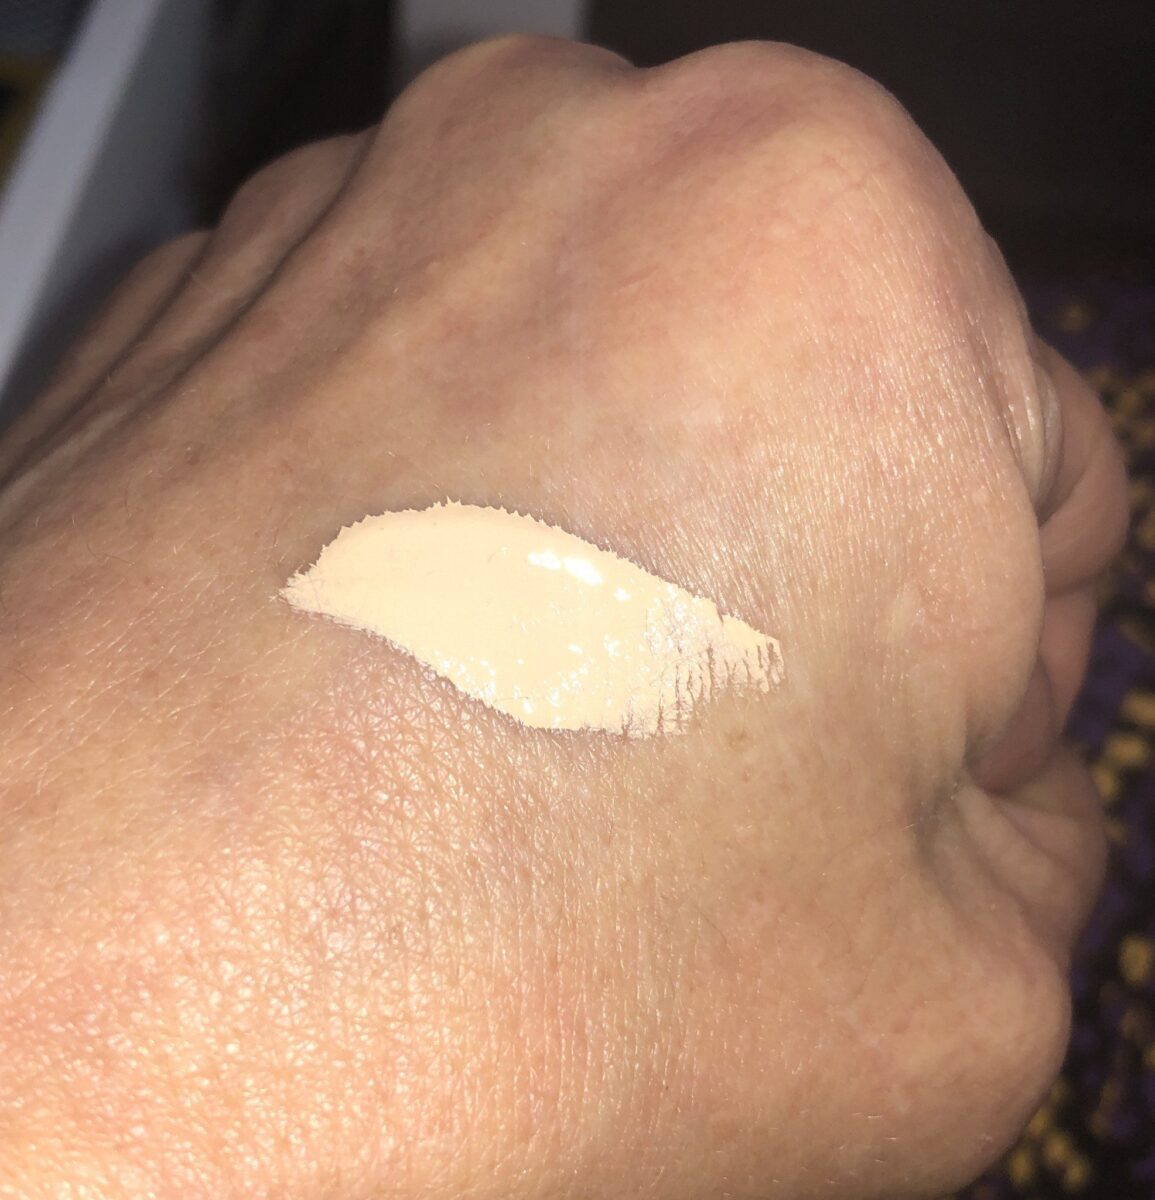 SWATCH OF THE HOURGLASS VANISH AIRBRUSH CONCEALER IN SEPIA